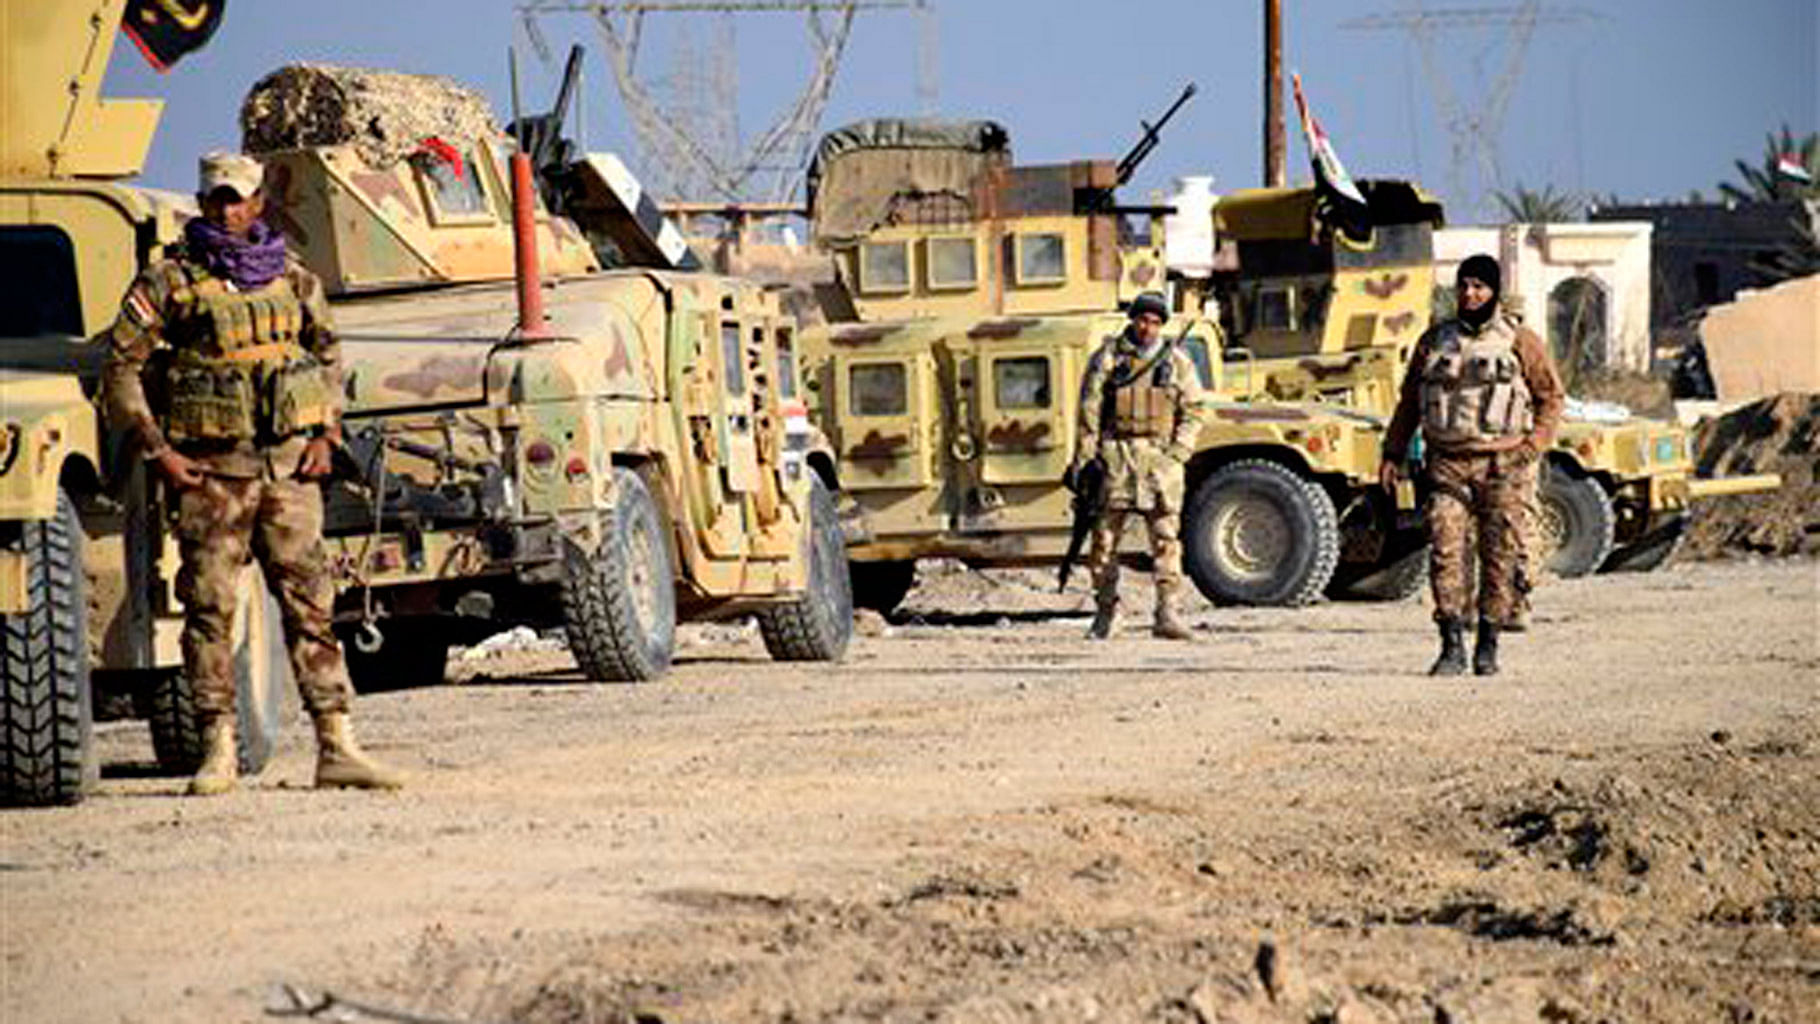 Iraqi soldiers have reclaimed the land from the ISIS after a fierce battle.